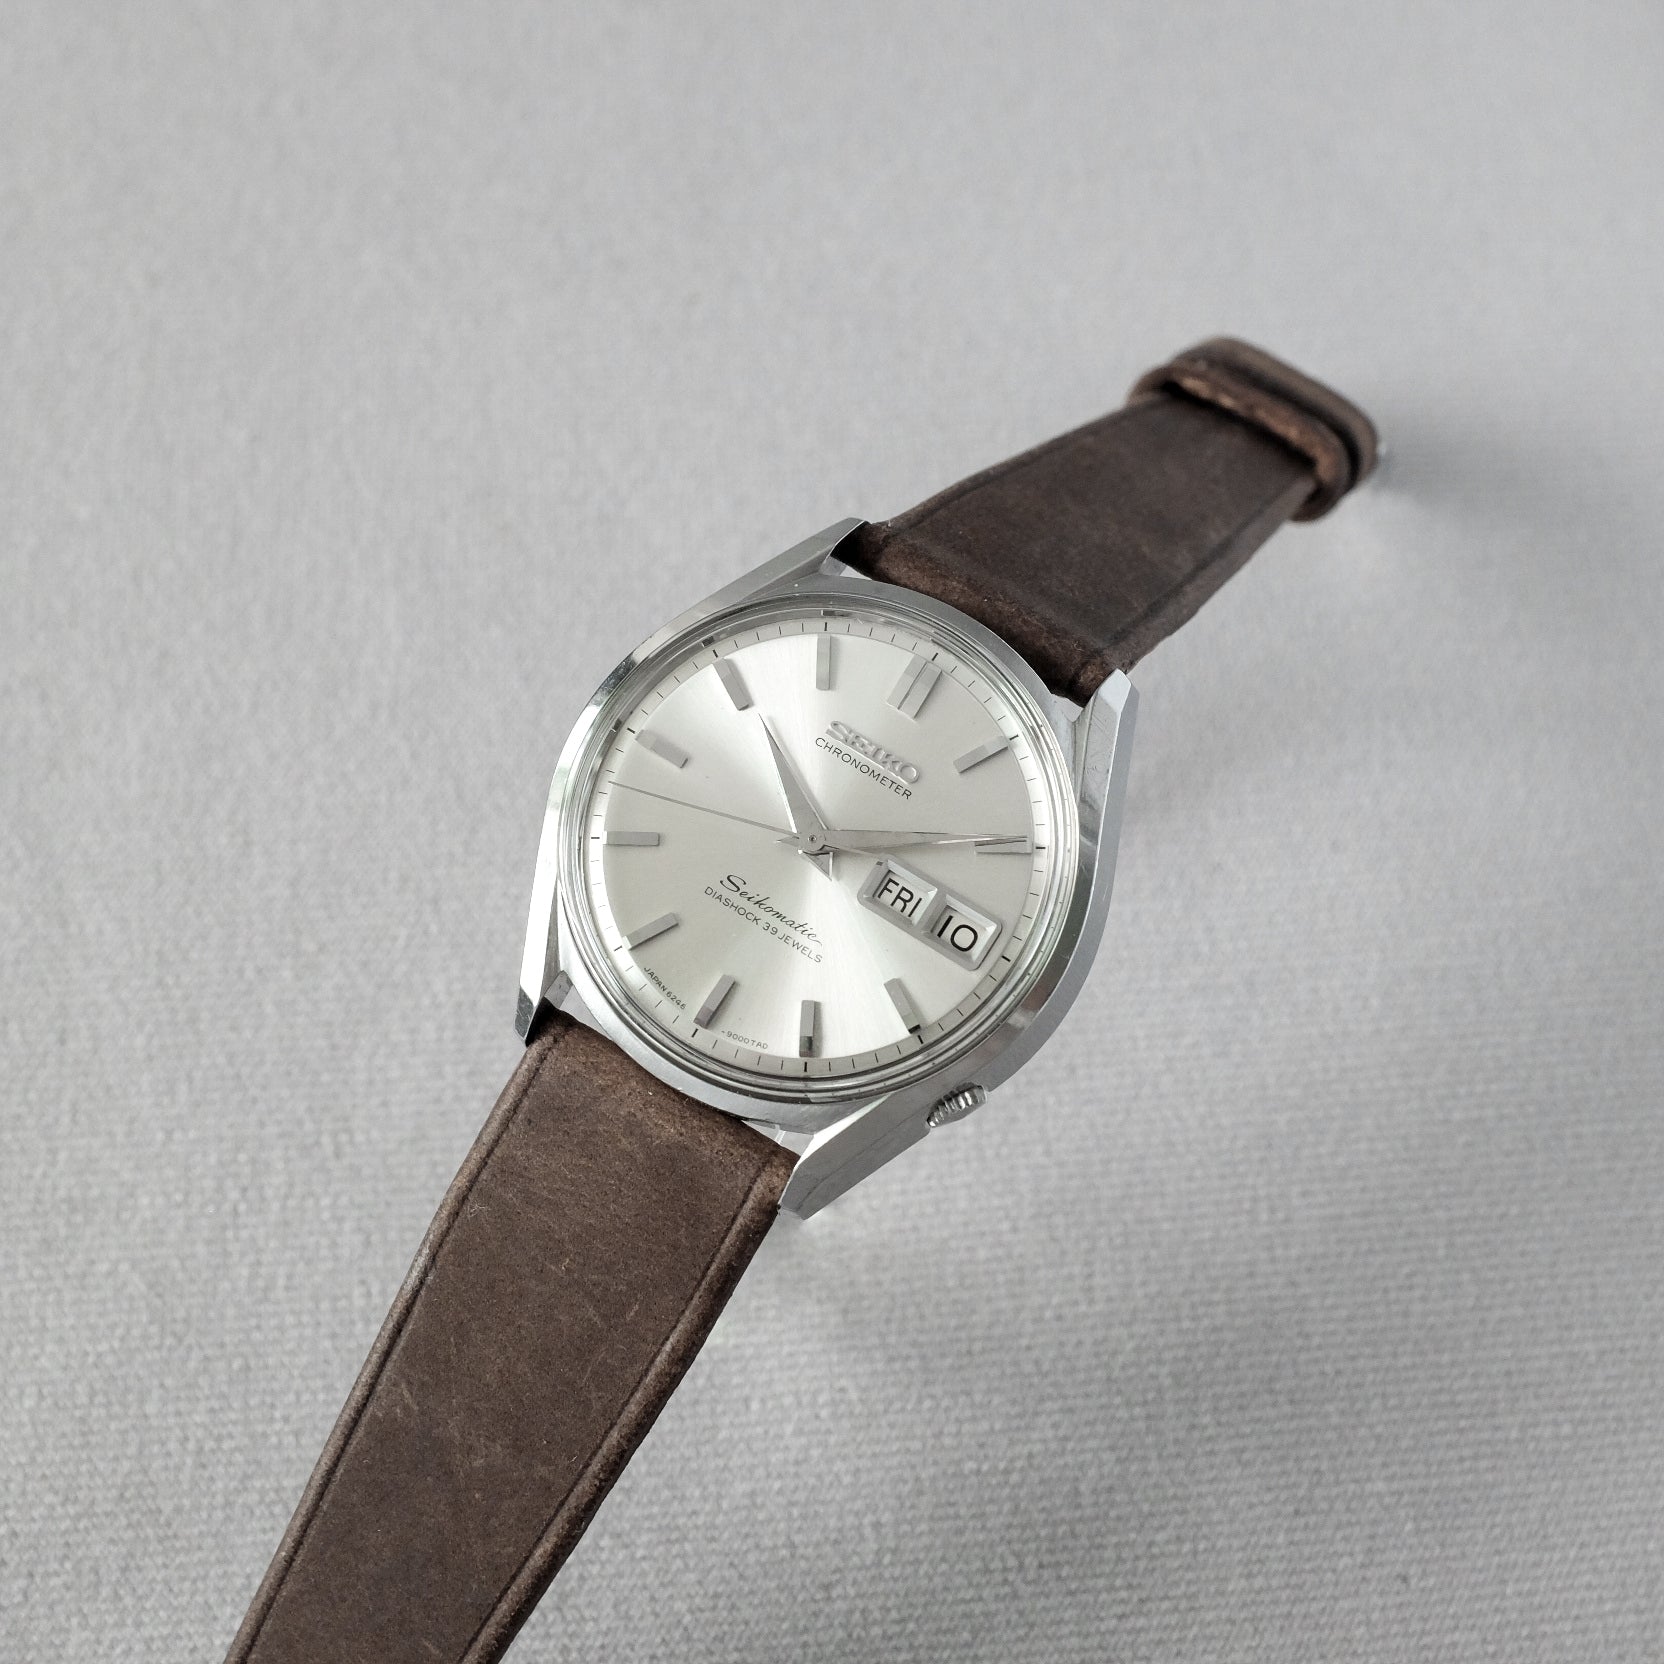 Seikomatic Chronometer 6246-9000 from 1966 (Serviced with NOS crystal)